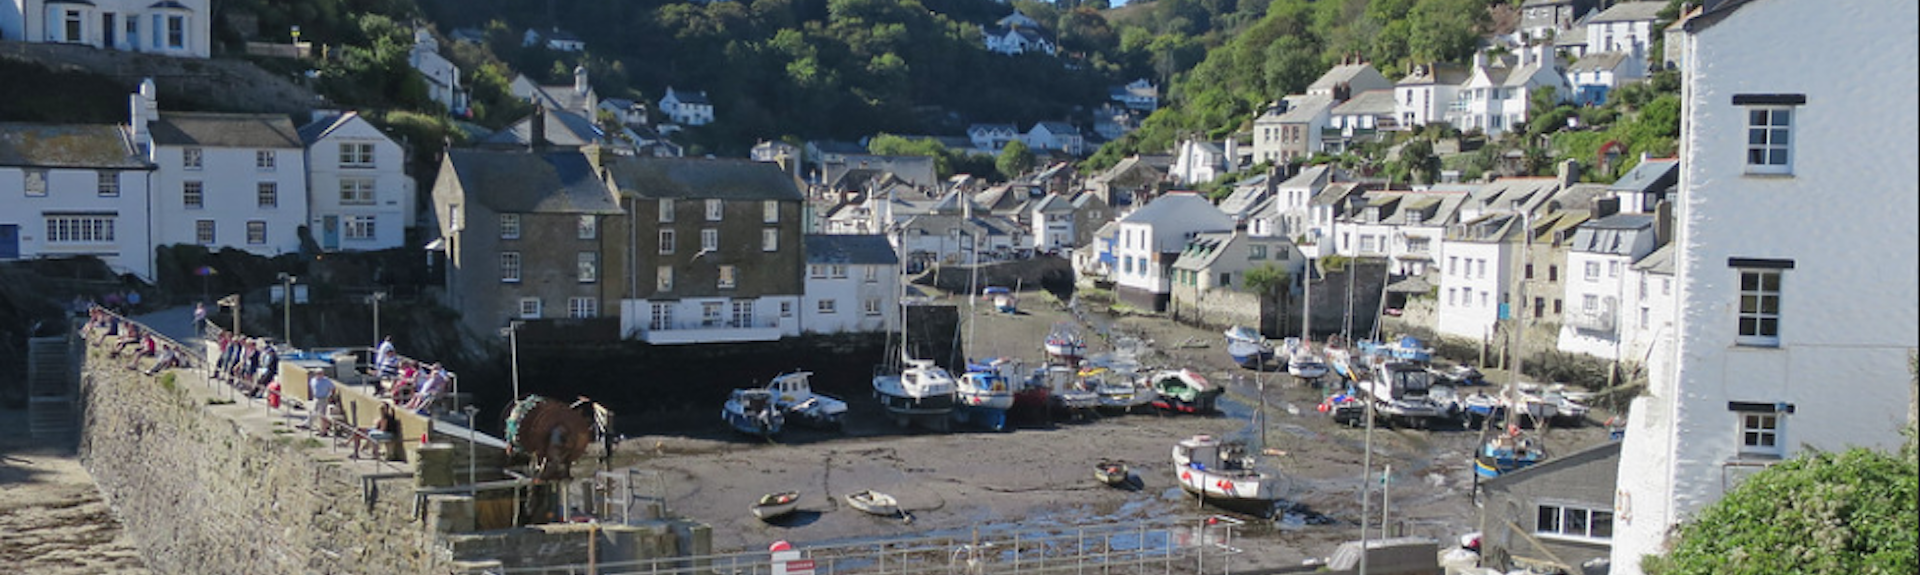 Fishermen's cottages line the quayside of Polperro harbour at low tide